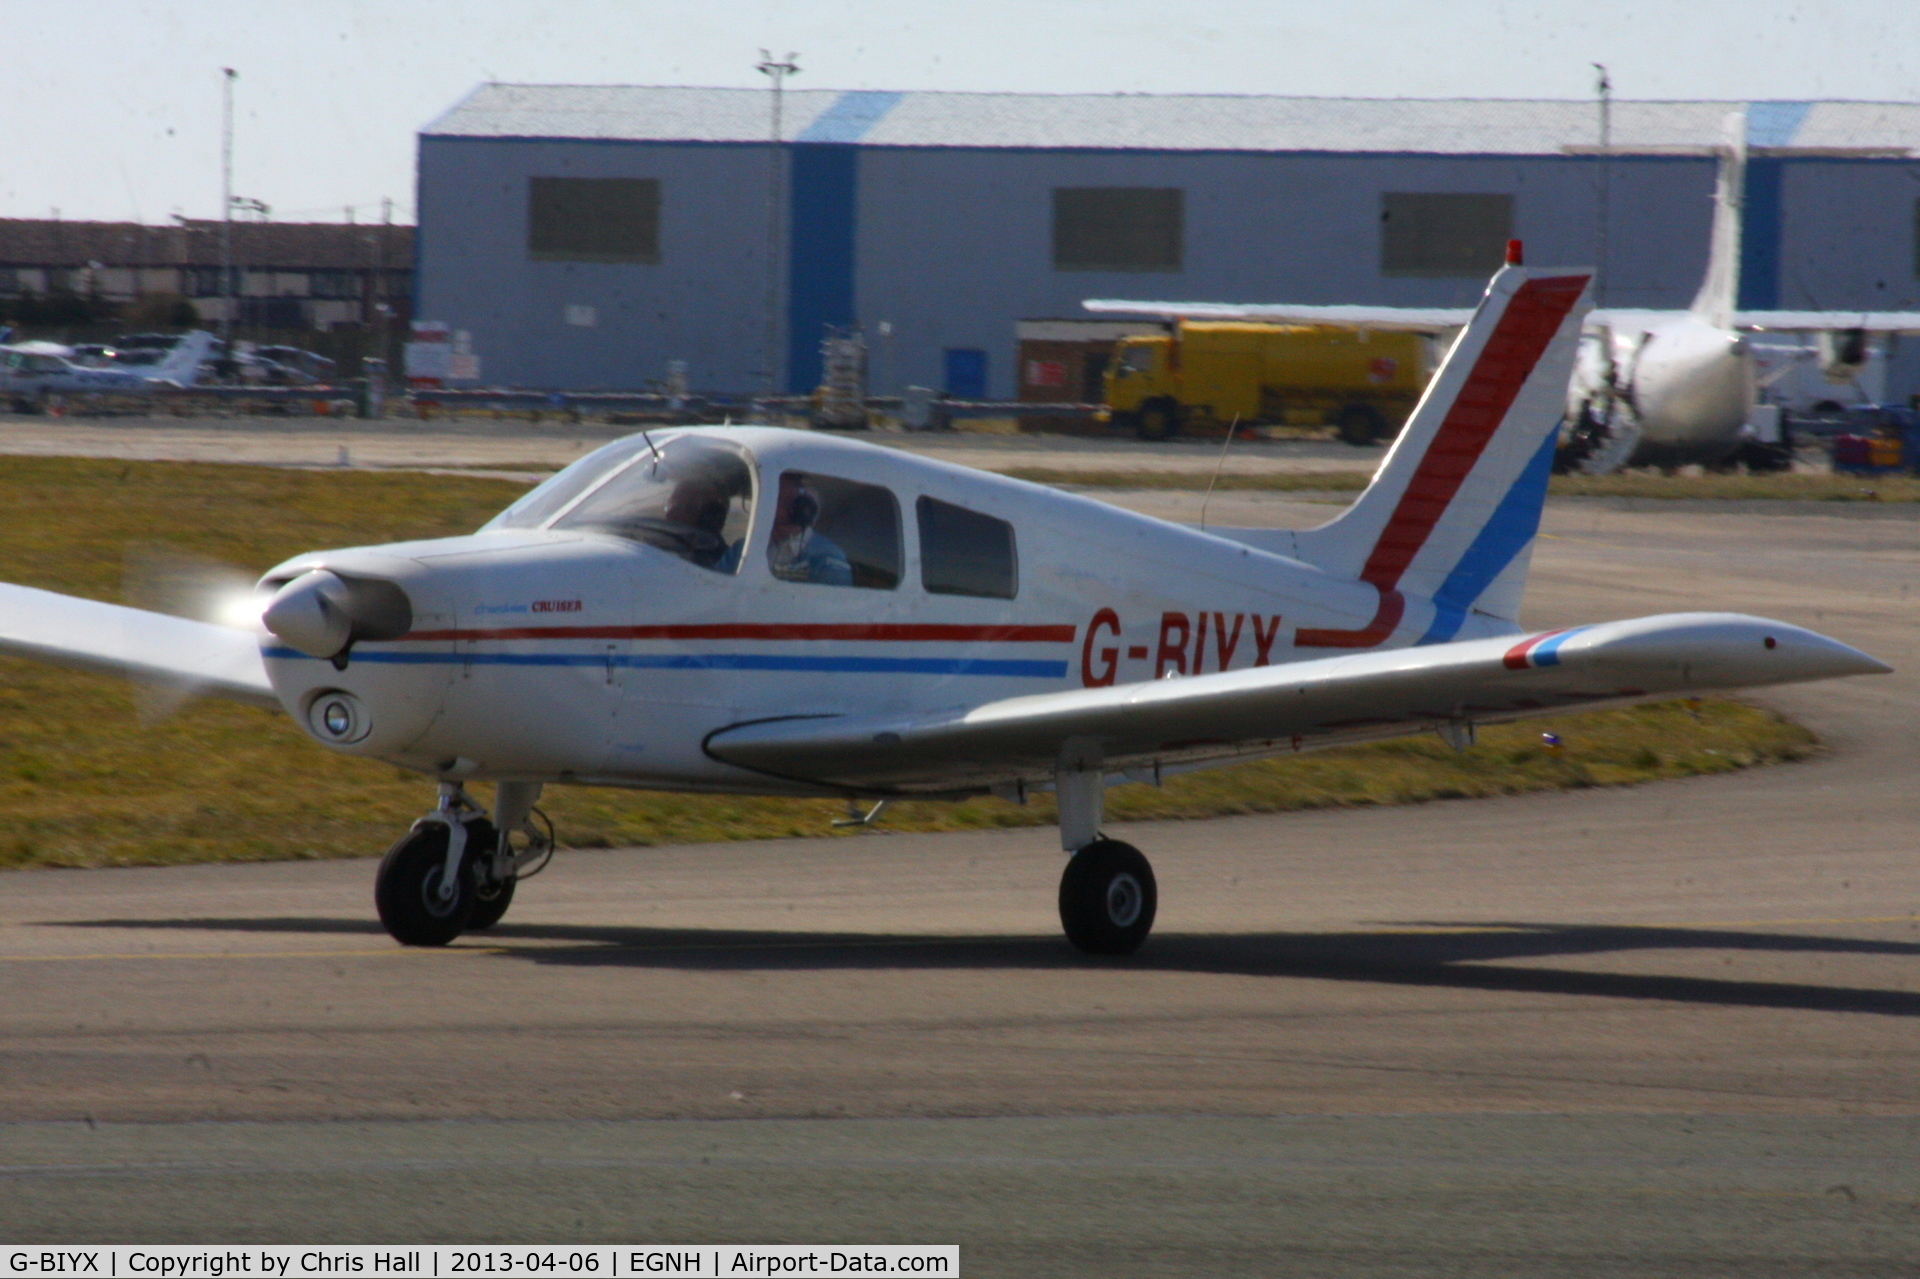 G-BIYX, 1975 Piper PA-28-140 Cherokee Cruiser C/N 28-7625064, privately owned